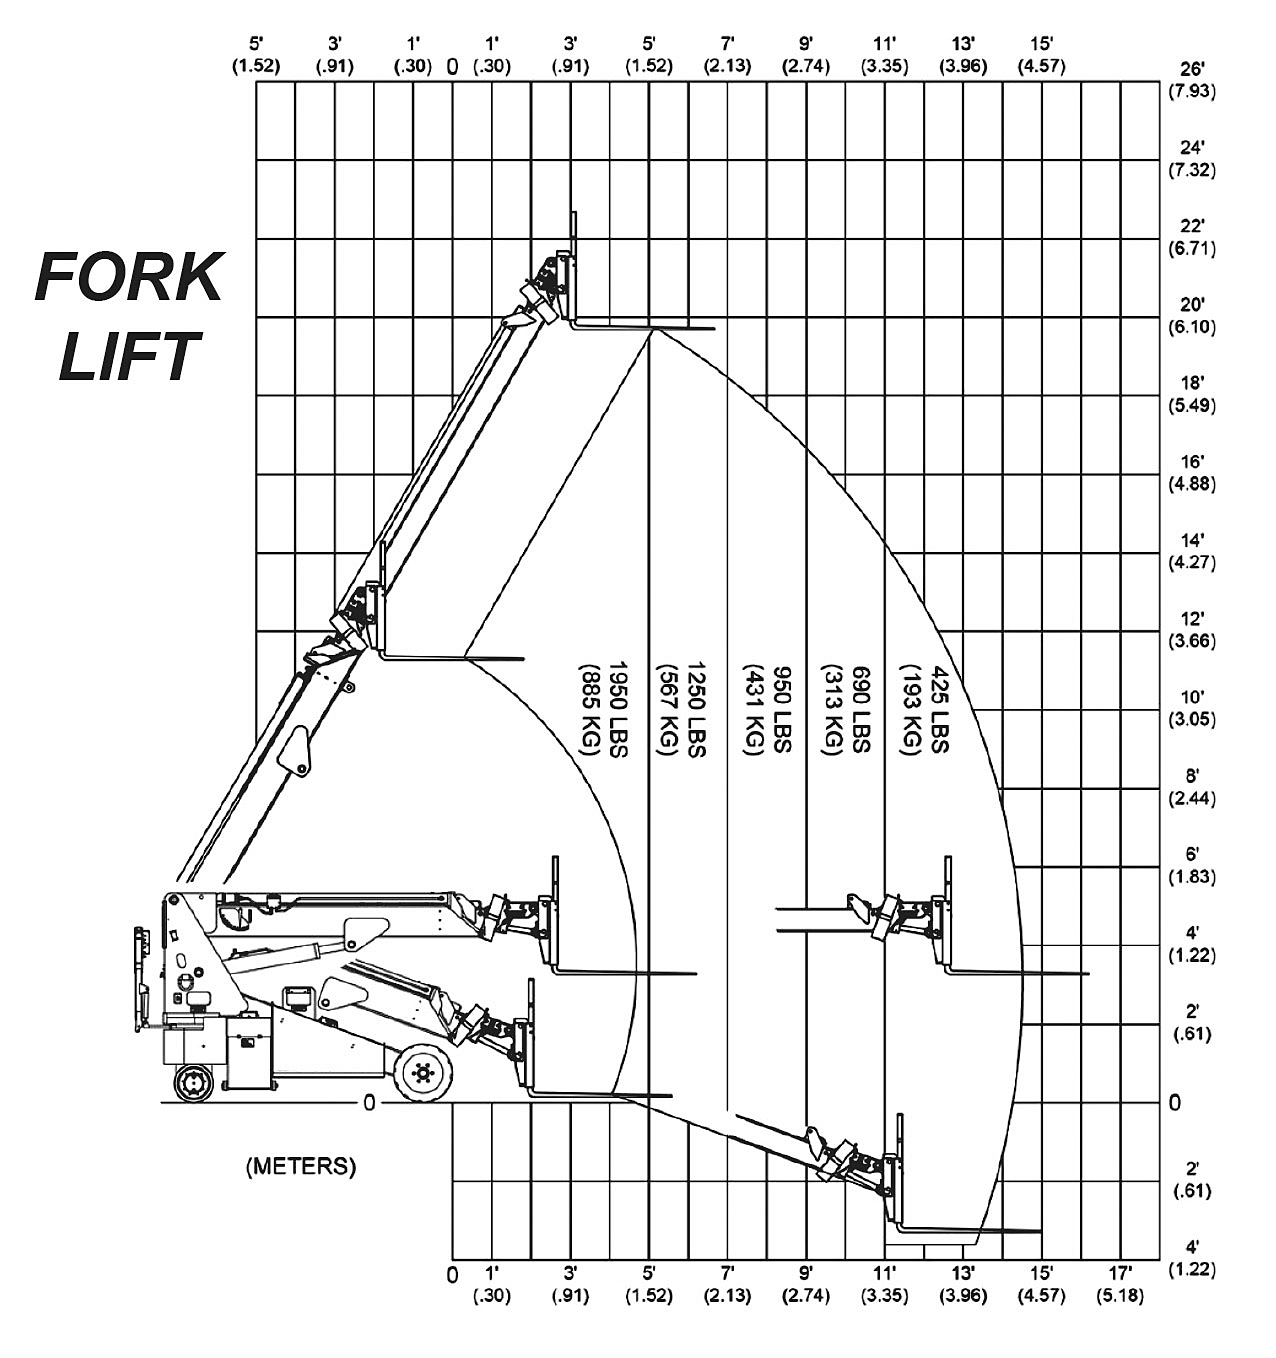 The Junior Forks Load Capacity